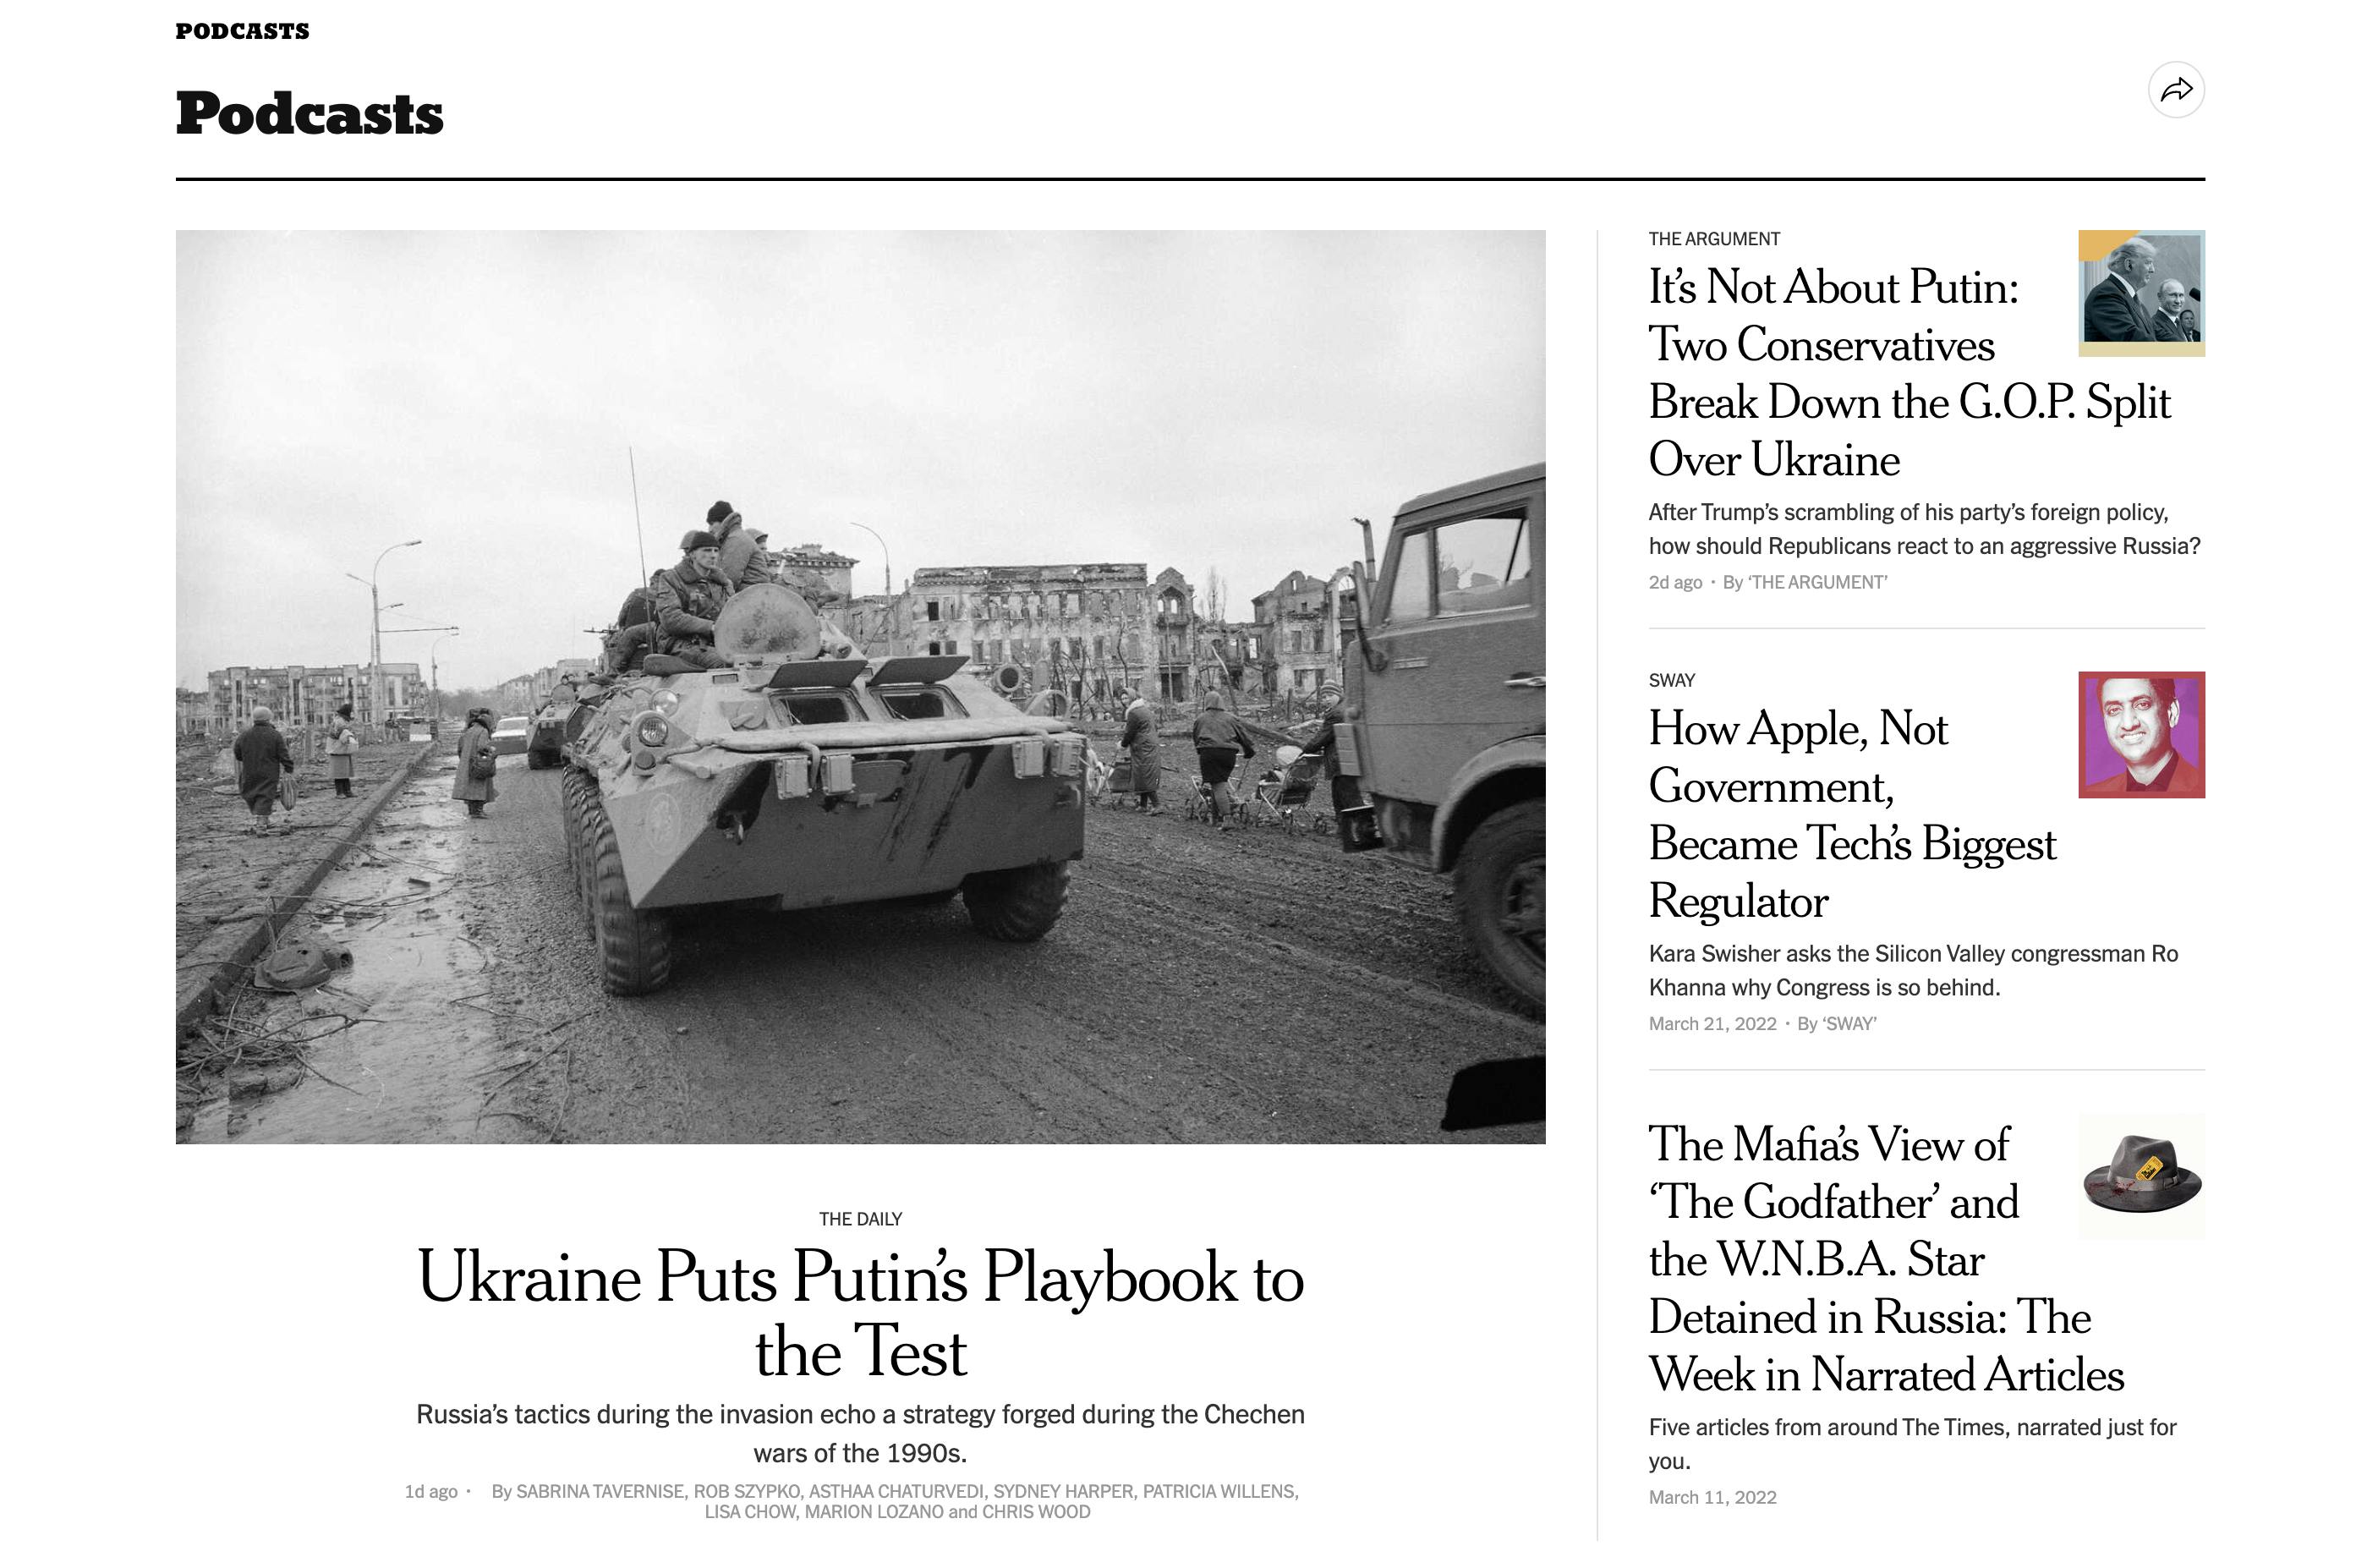 The New York Times homepage featuring podcast images of Ukraine from The Daily